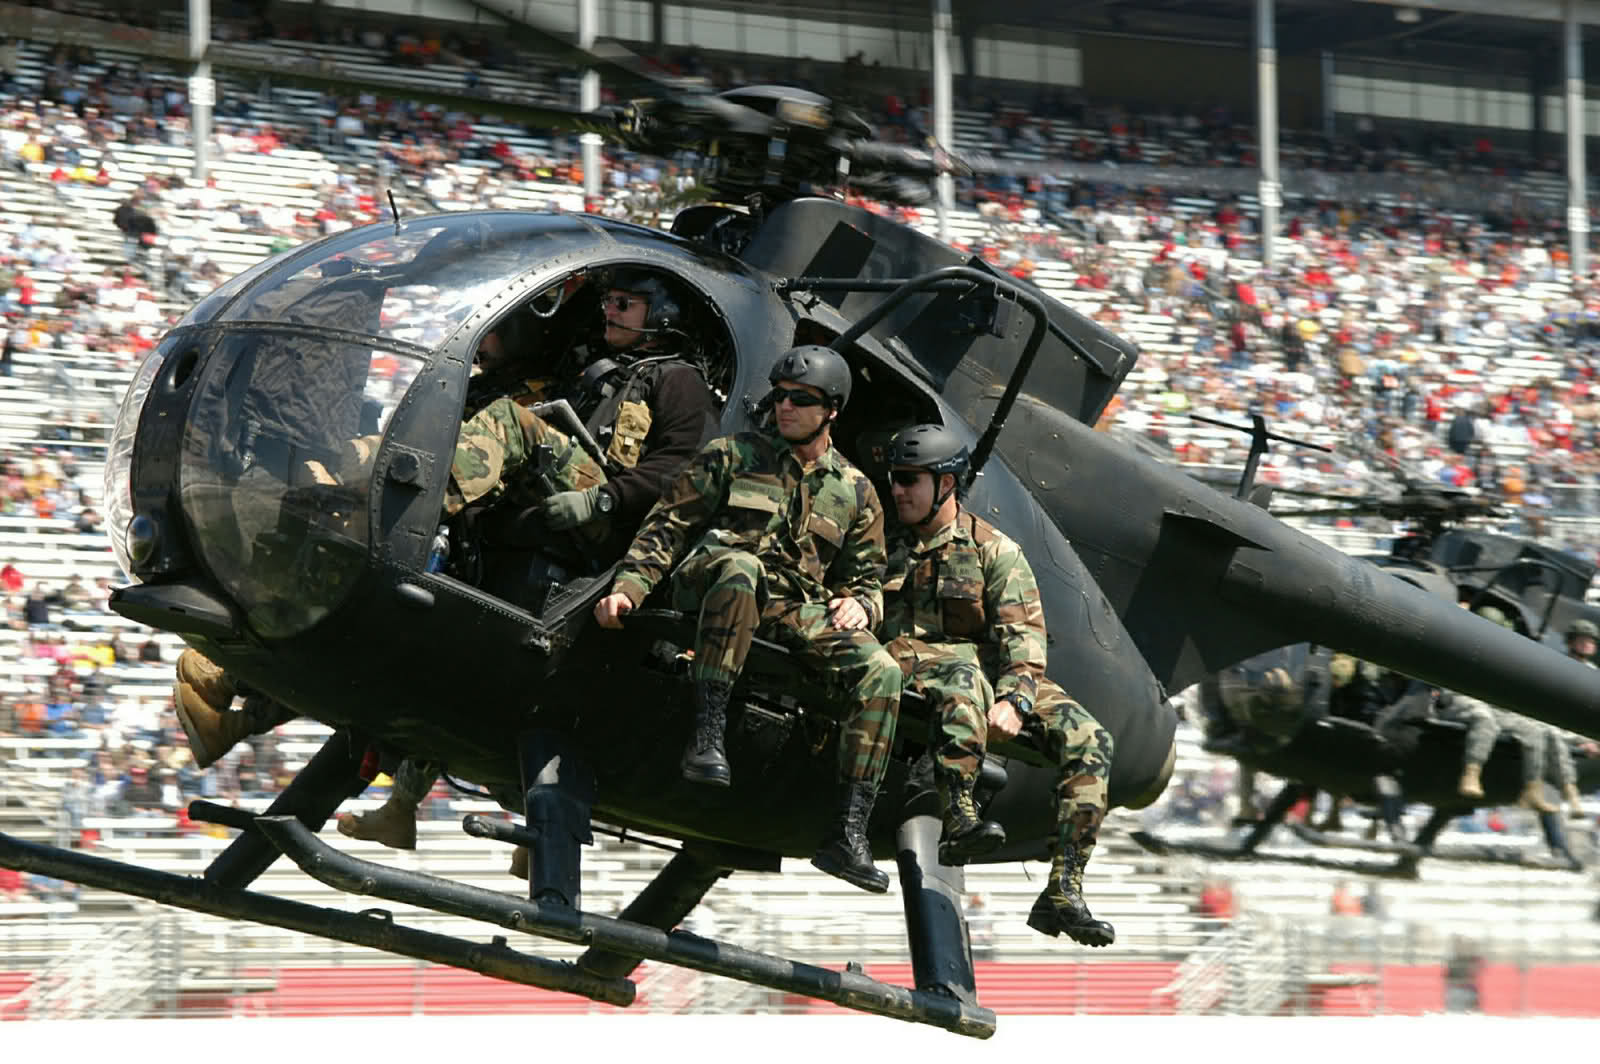 Four Special Operations warriors enter the Atlanta Motor Speedway aboard a MH-6 Little Bird helicopter during pre-race activities at the Kobalt Tools 500 at Atlanta Motor Speedway Mar. 18.  (Photo by Bonita Riddley, USASOC PAO)